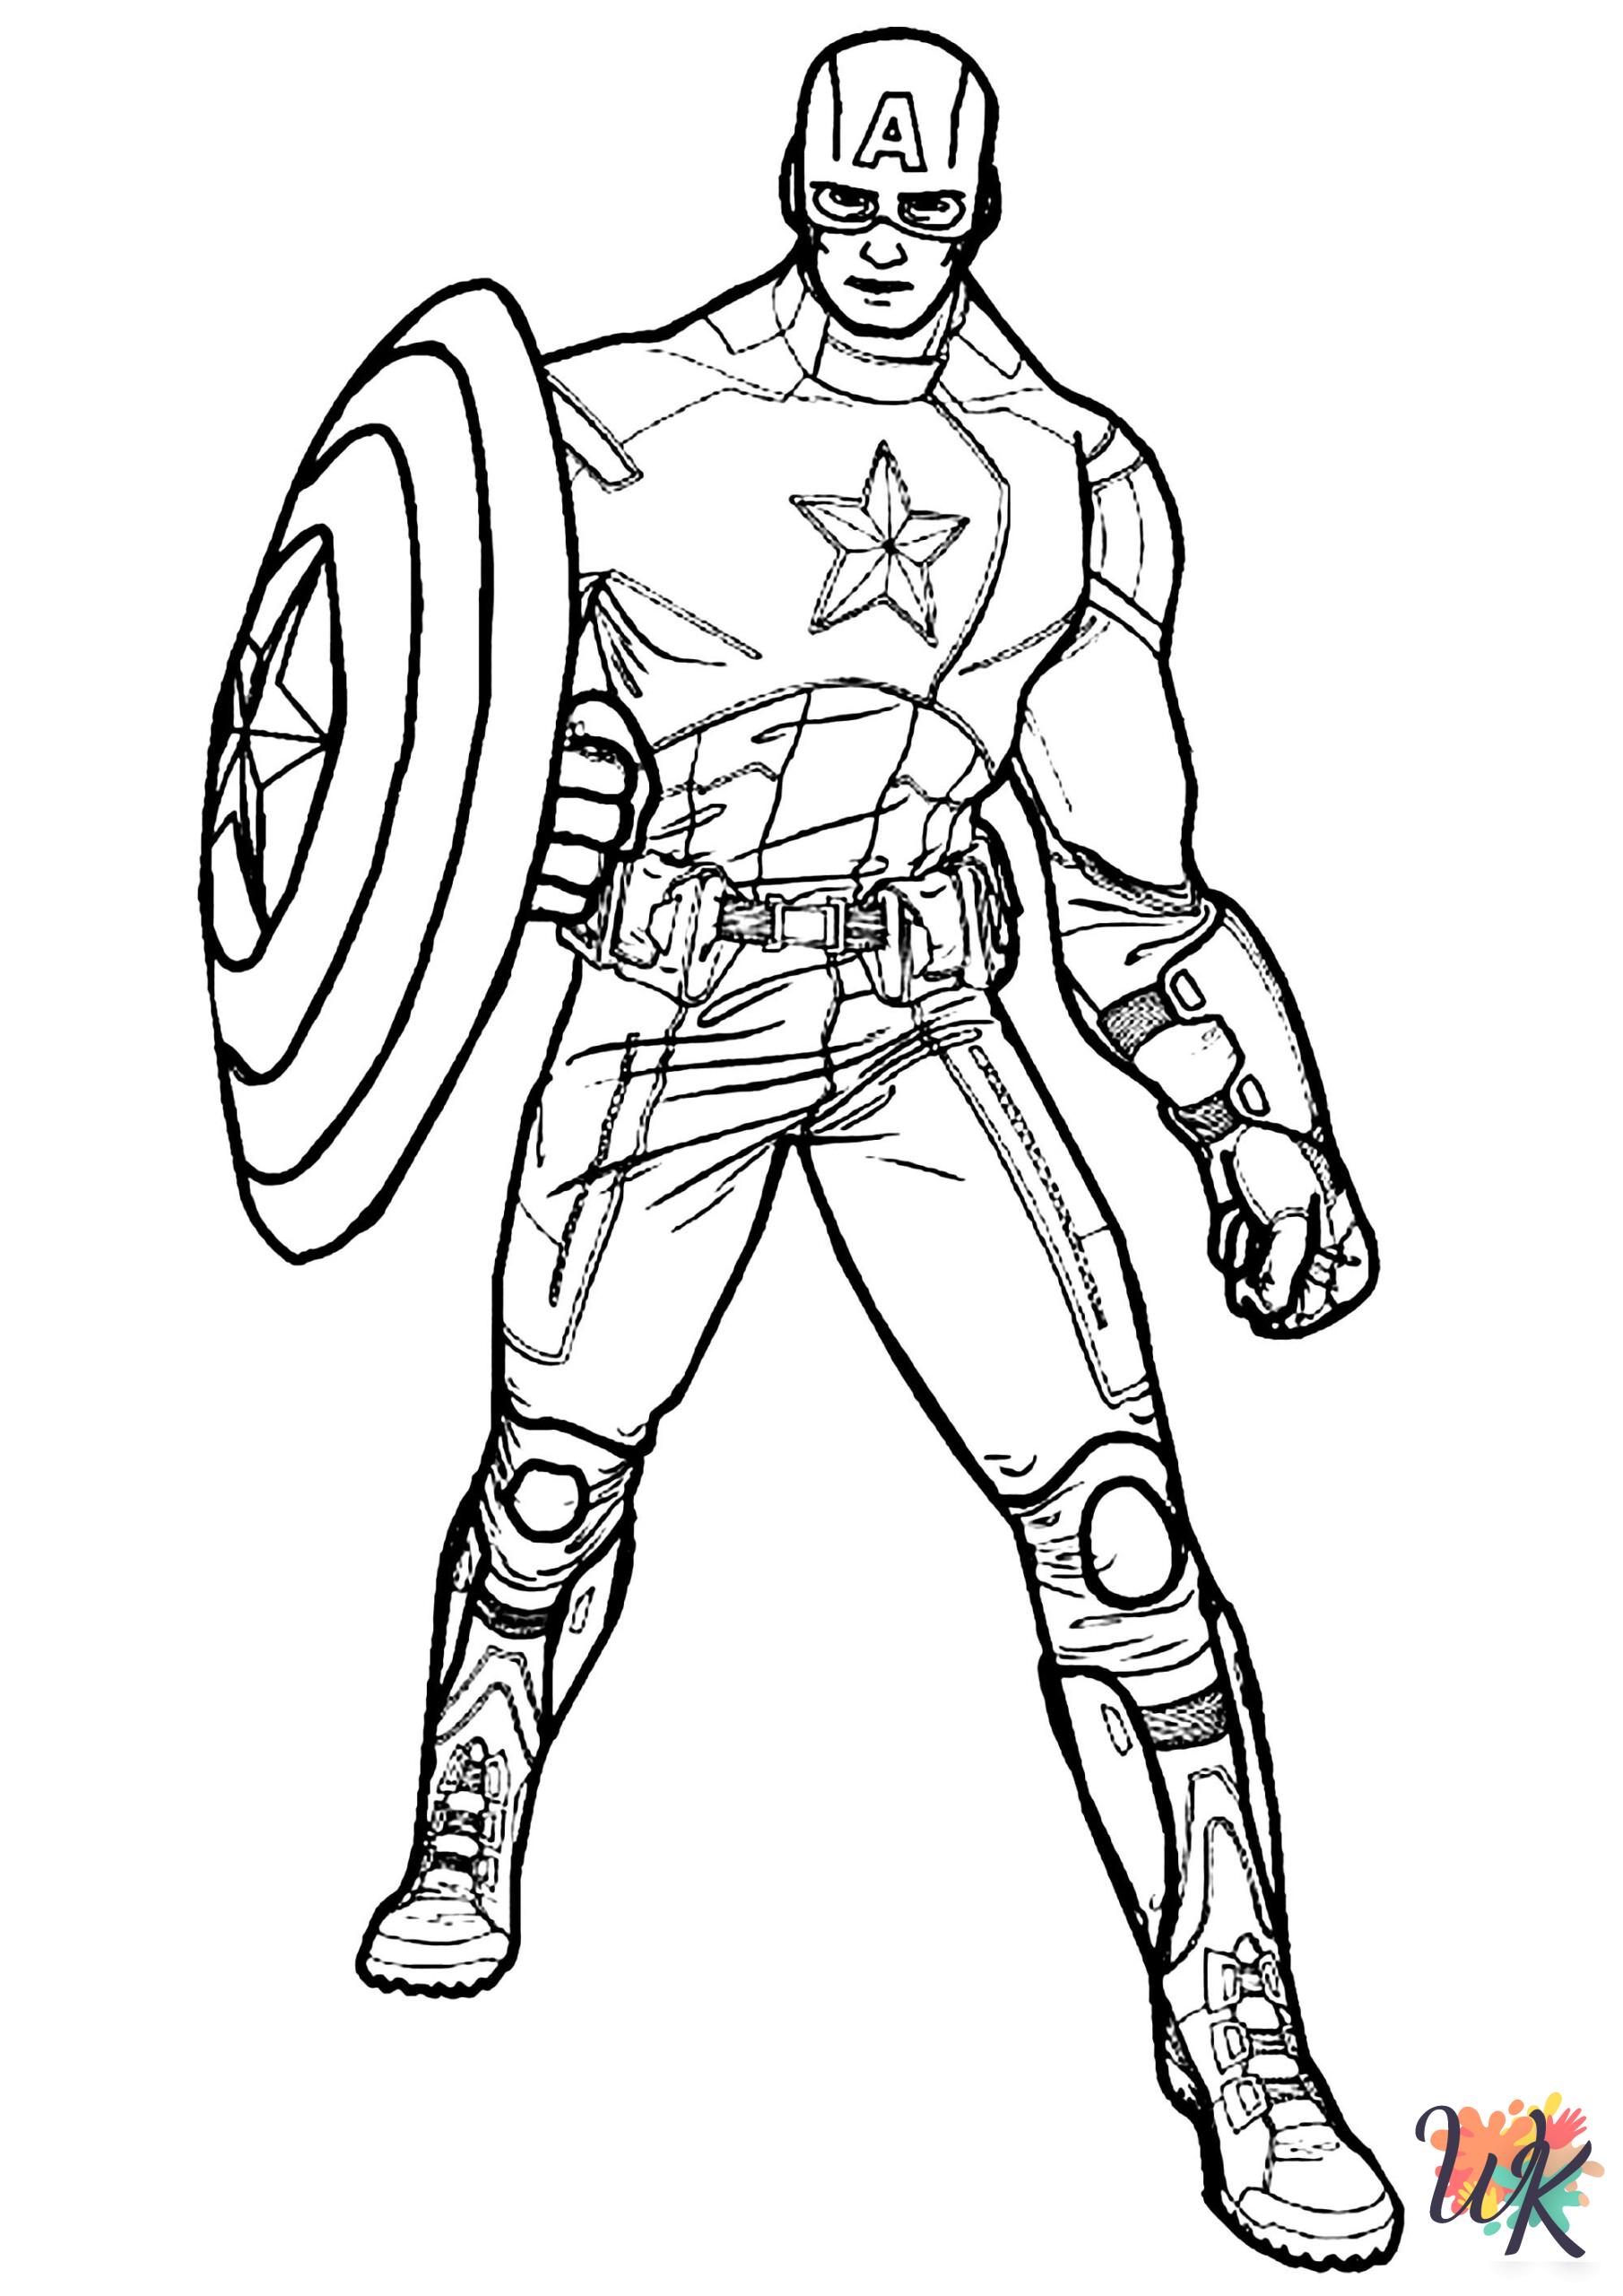 coloring pages for kids Superhero